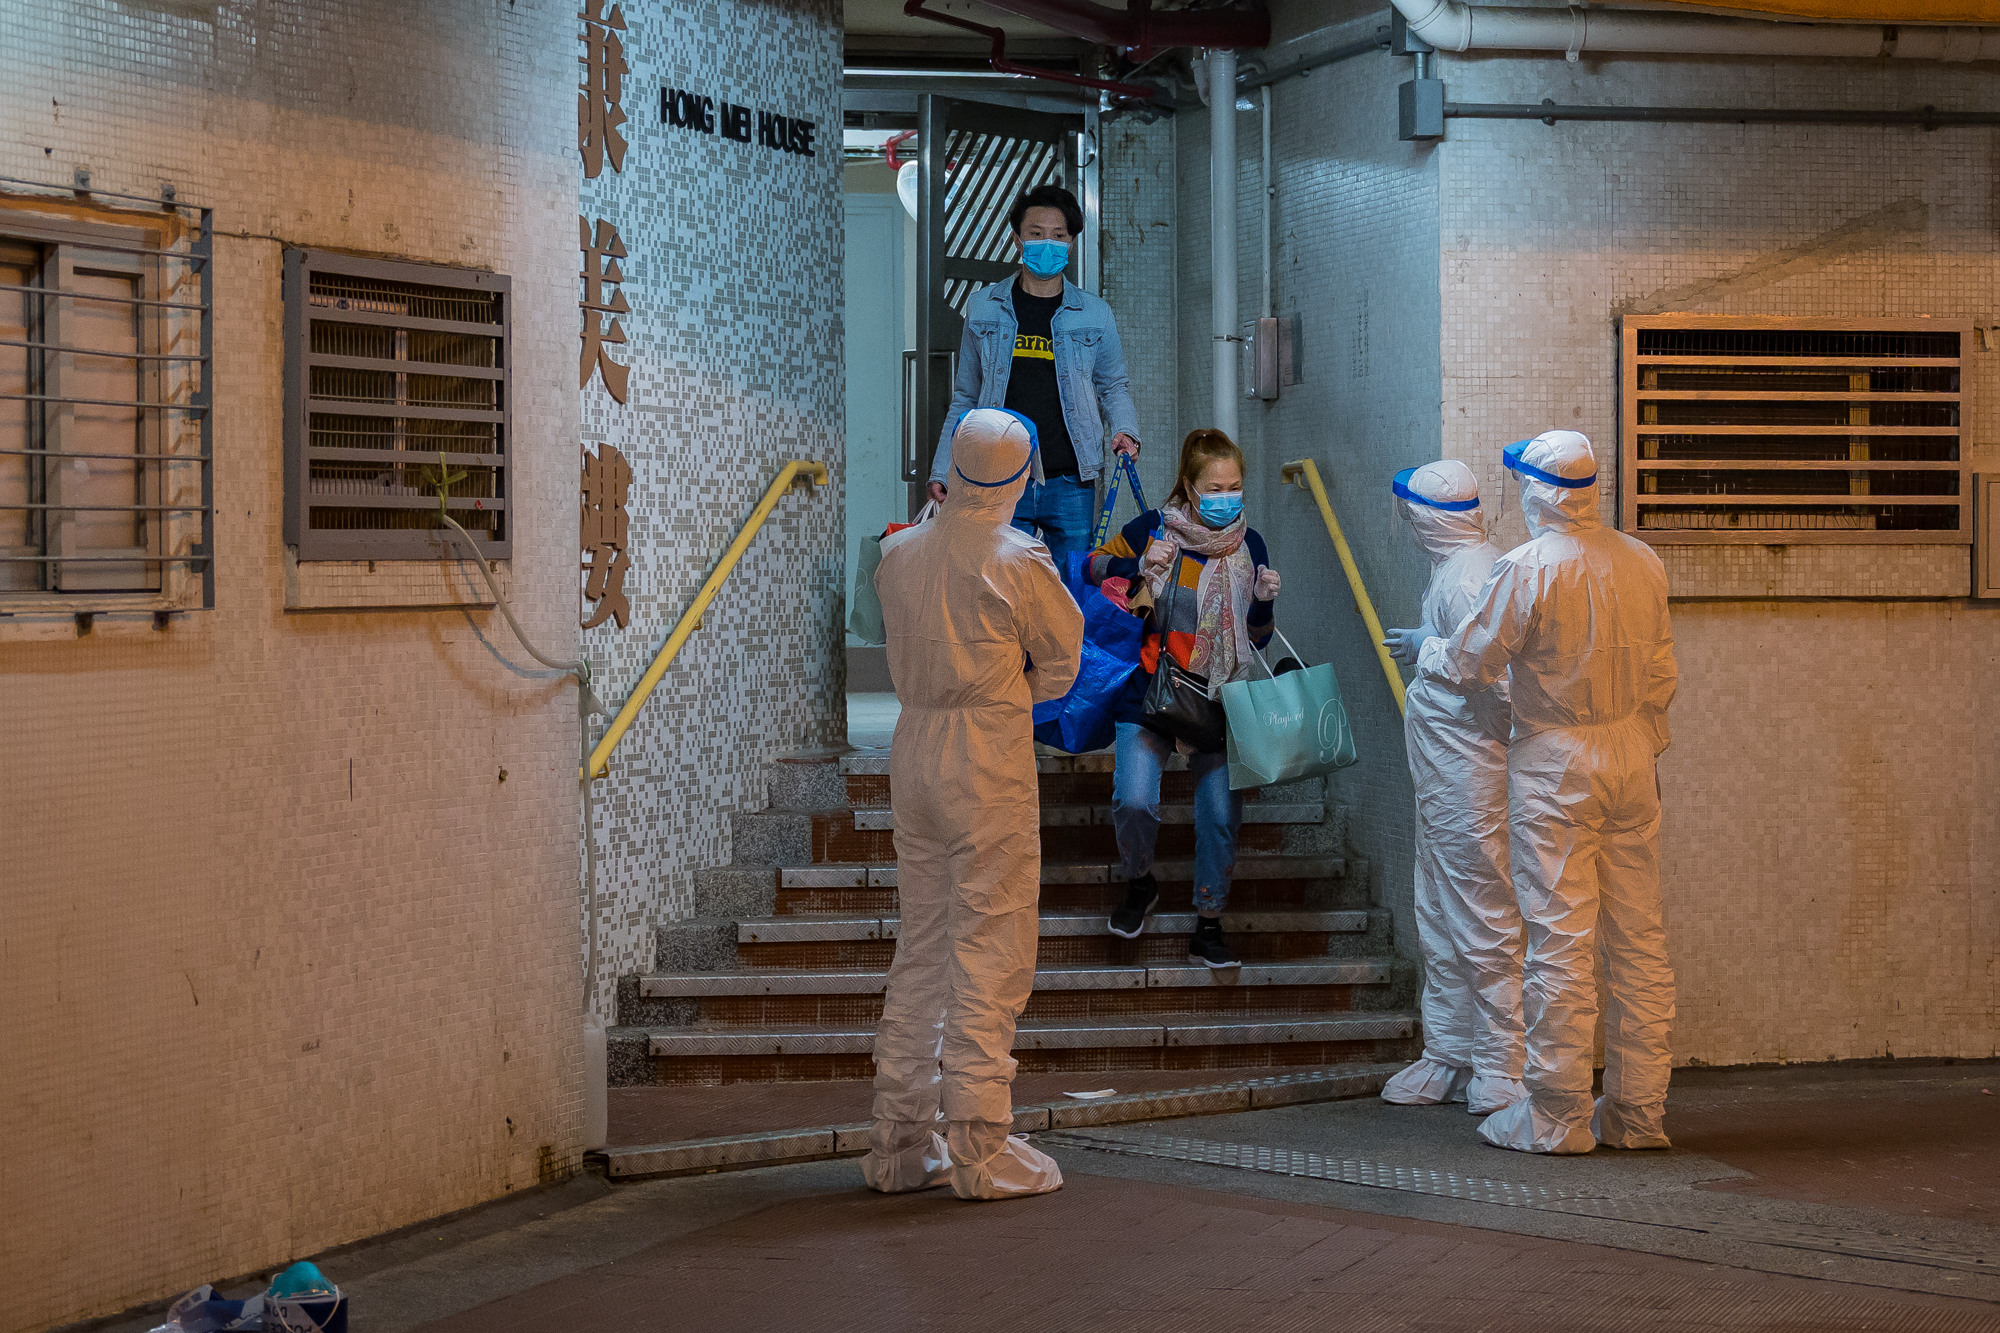 PHOTO: Residents leave the Hong Mei House residential building at Cheung Hong Estate as officials wearing protective gear stand guard outside the entrance, in Hong Kong's Tsing Yi area, China, on Feb. 11, 2020.